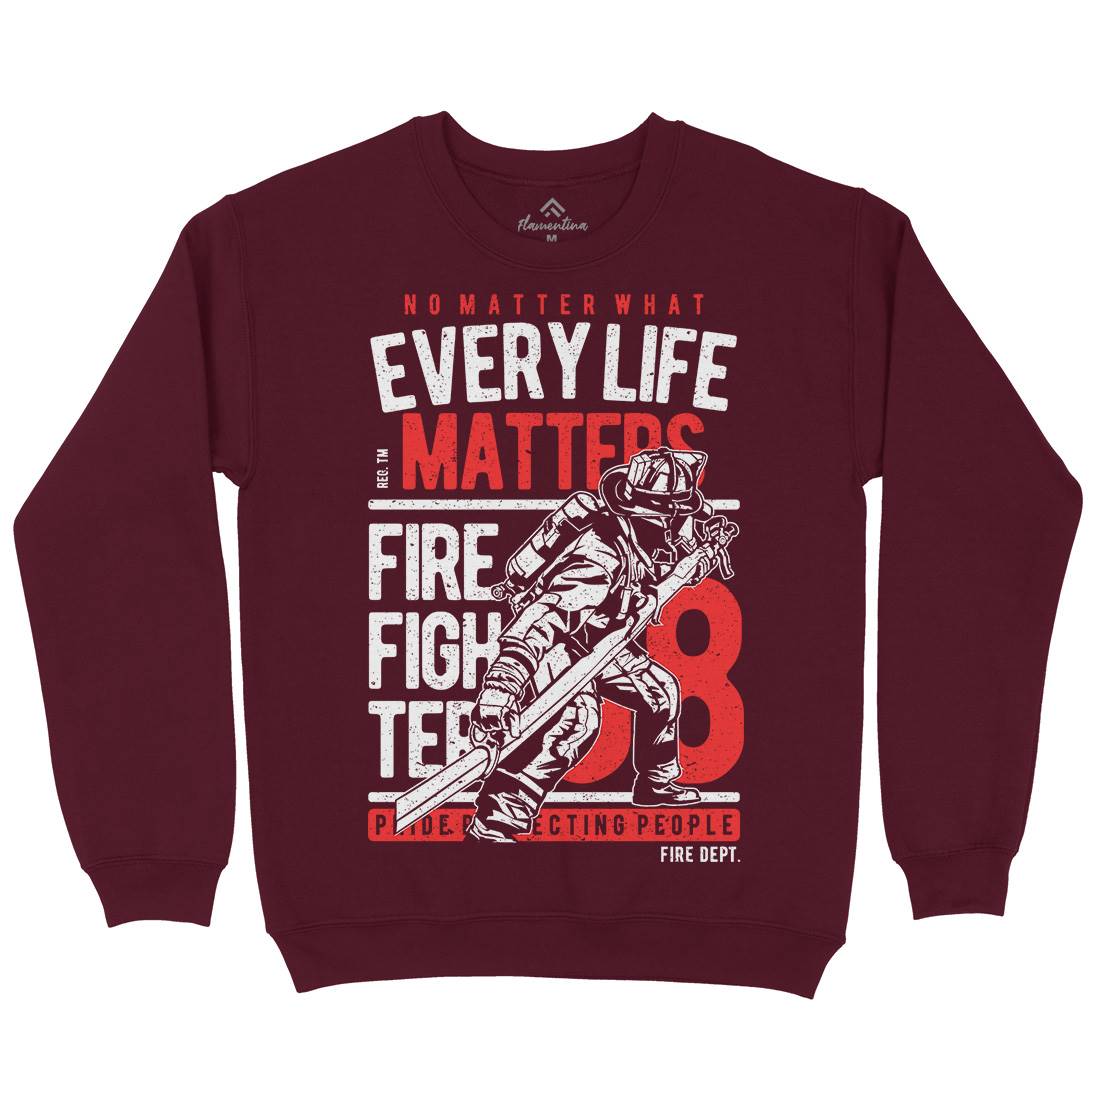 Every Life Matters Mens Crew Neck Sweatshirt Firefighters A650